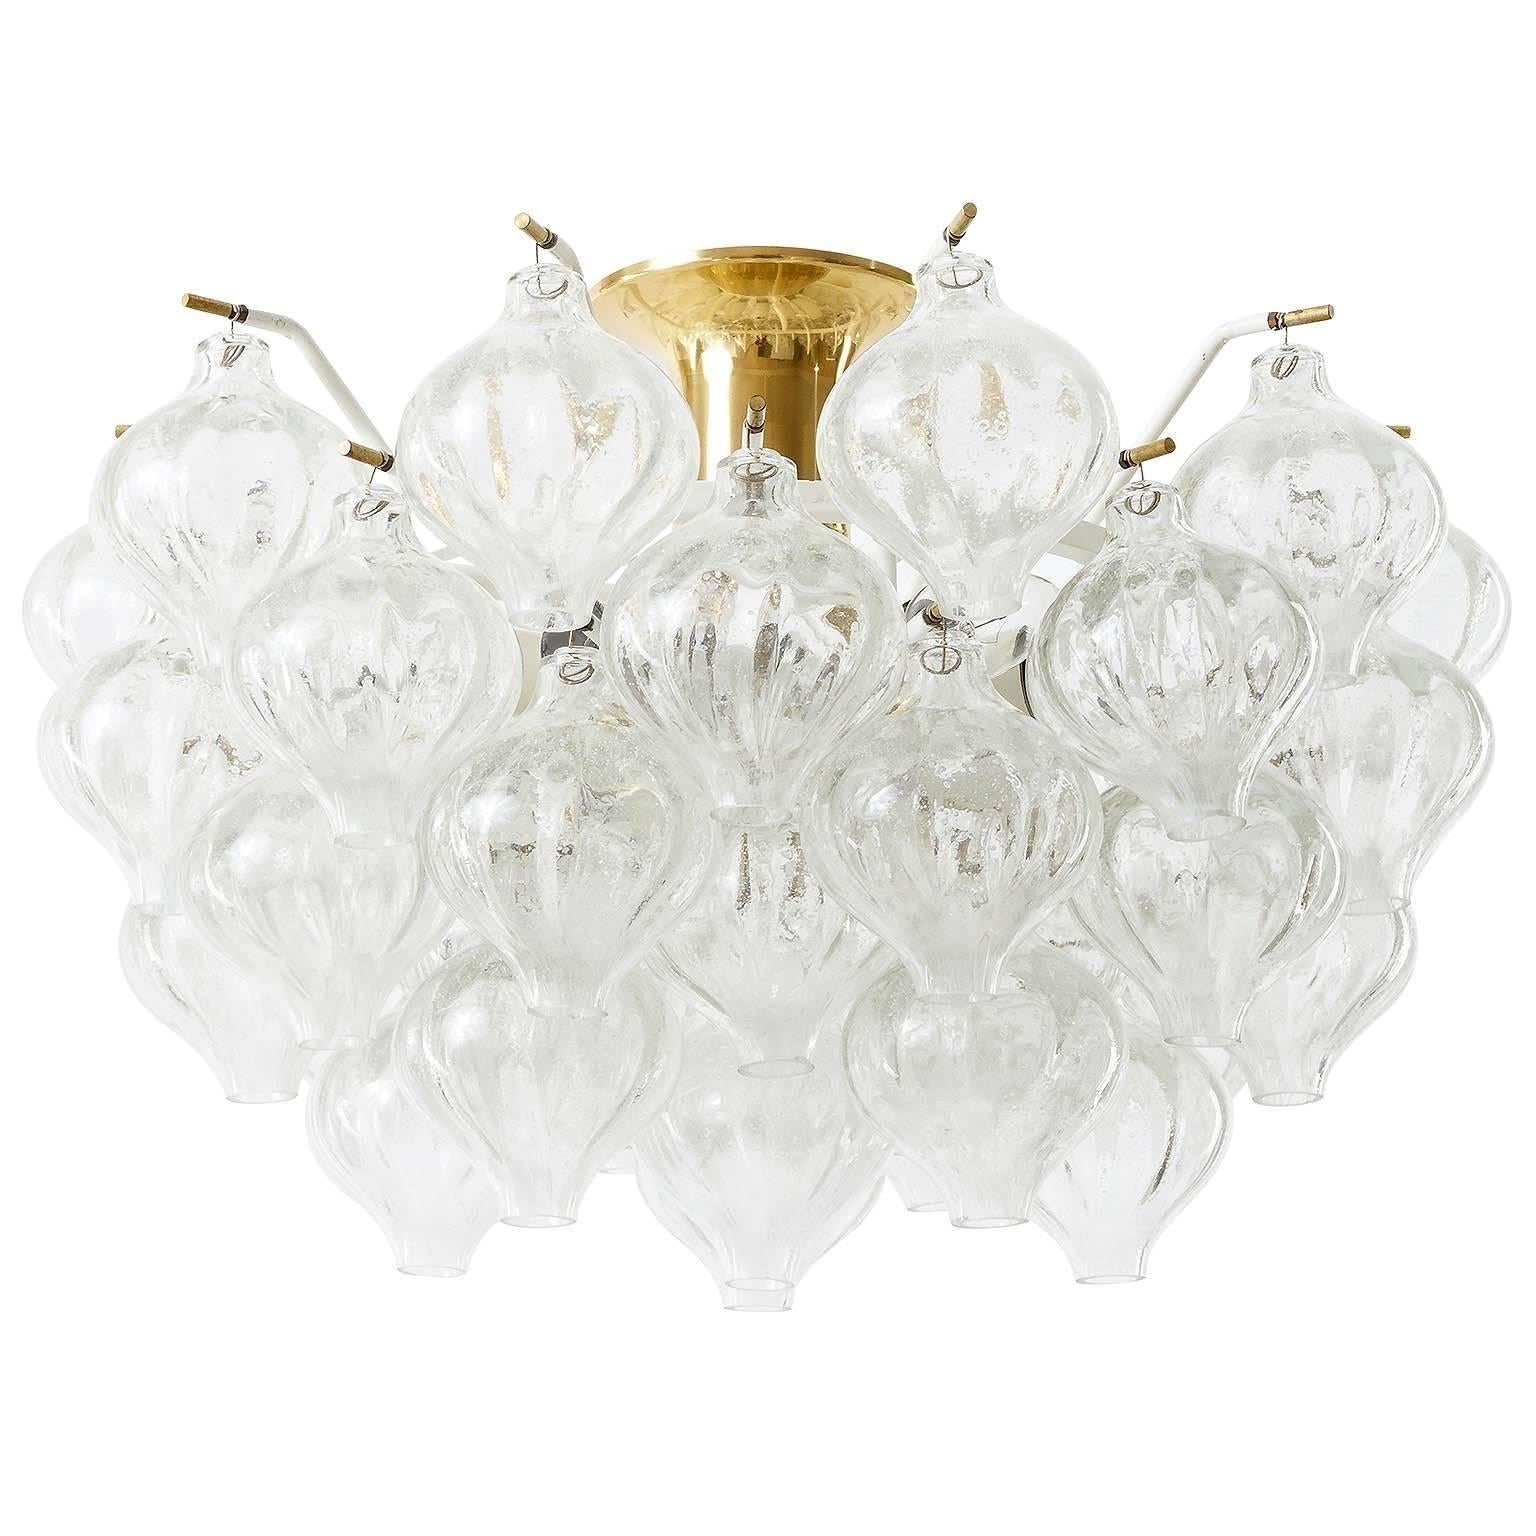 One of two gorgeous light fixtures model Tulipan by J.T. Kalmar, Vienna, Austria, manufactured in midcentury, circa 1970 (late 1960s or early 1970s).
The name Tulipan derives from the tulip shaped handblown bubble glasses. Each glass is handmade and